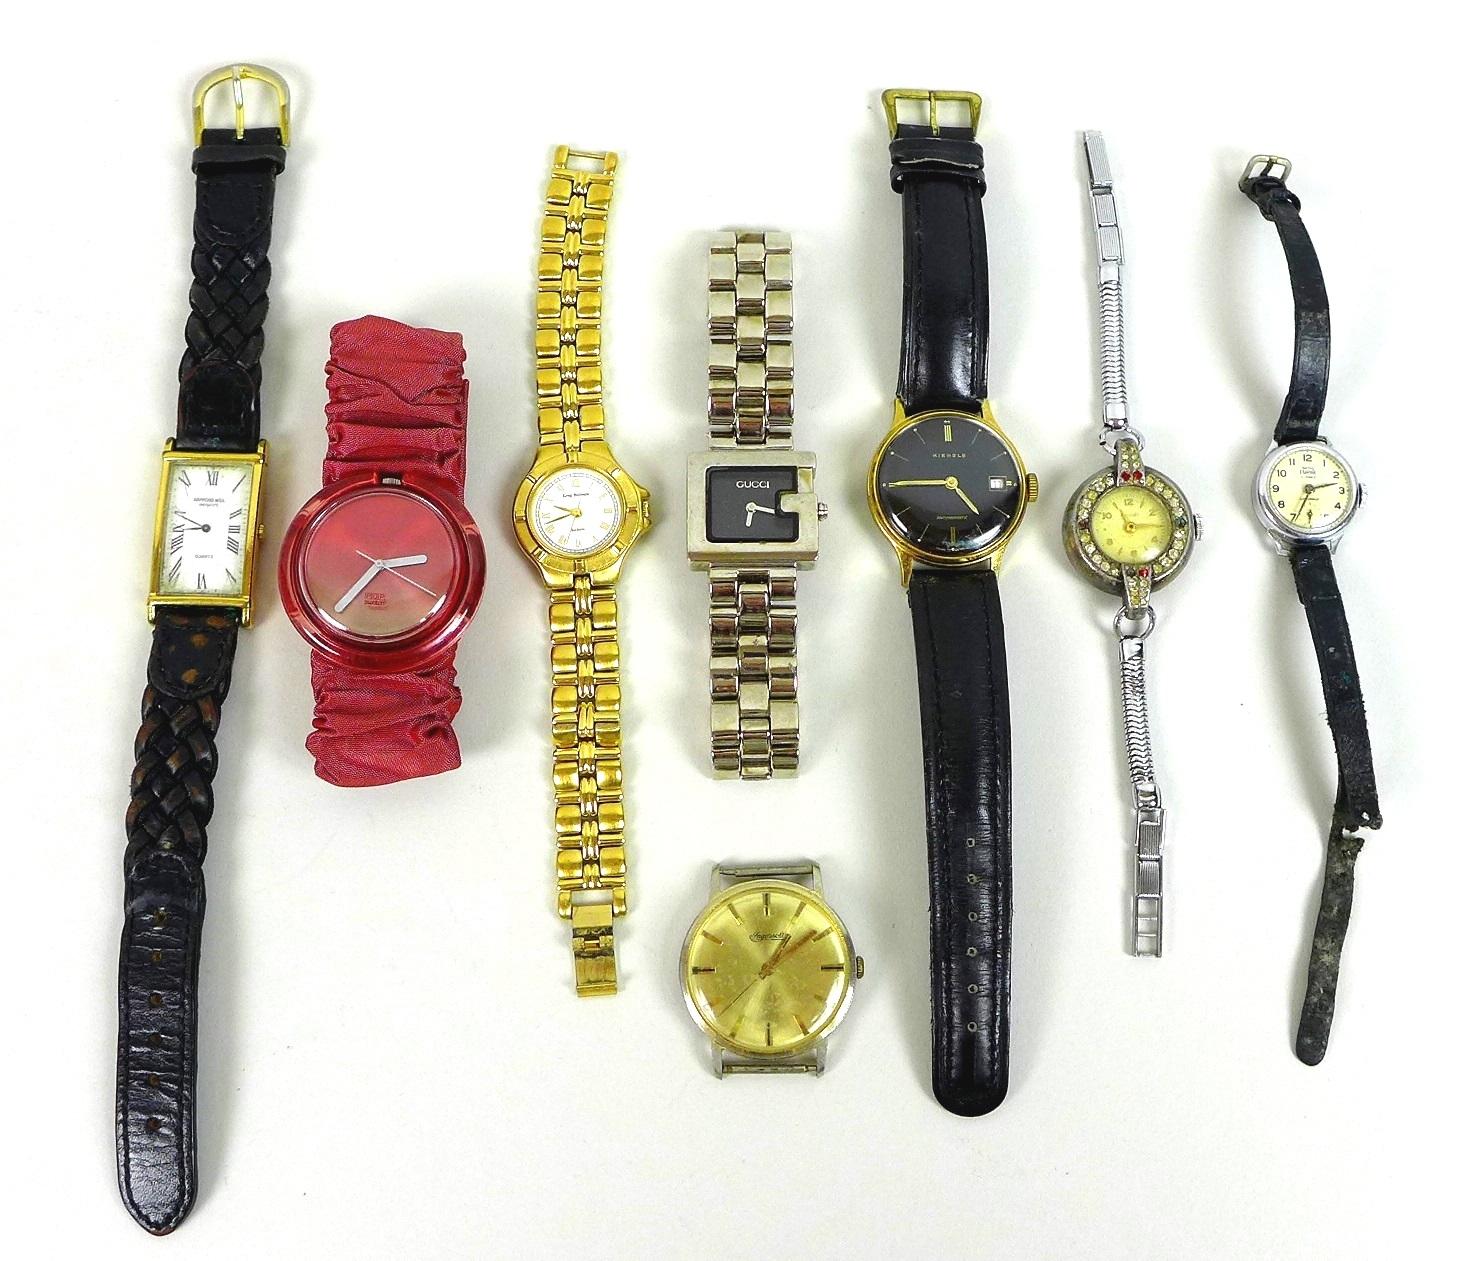 A group of eight watches, including a Raymond Weil rectangular faced watch with Roman numerals, a